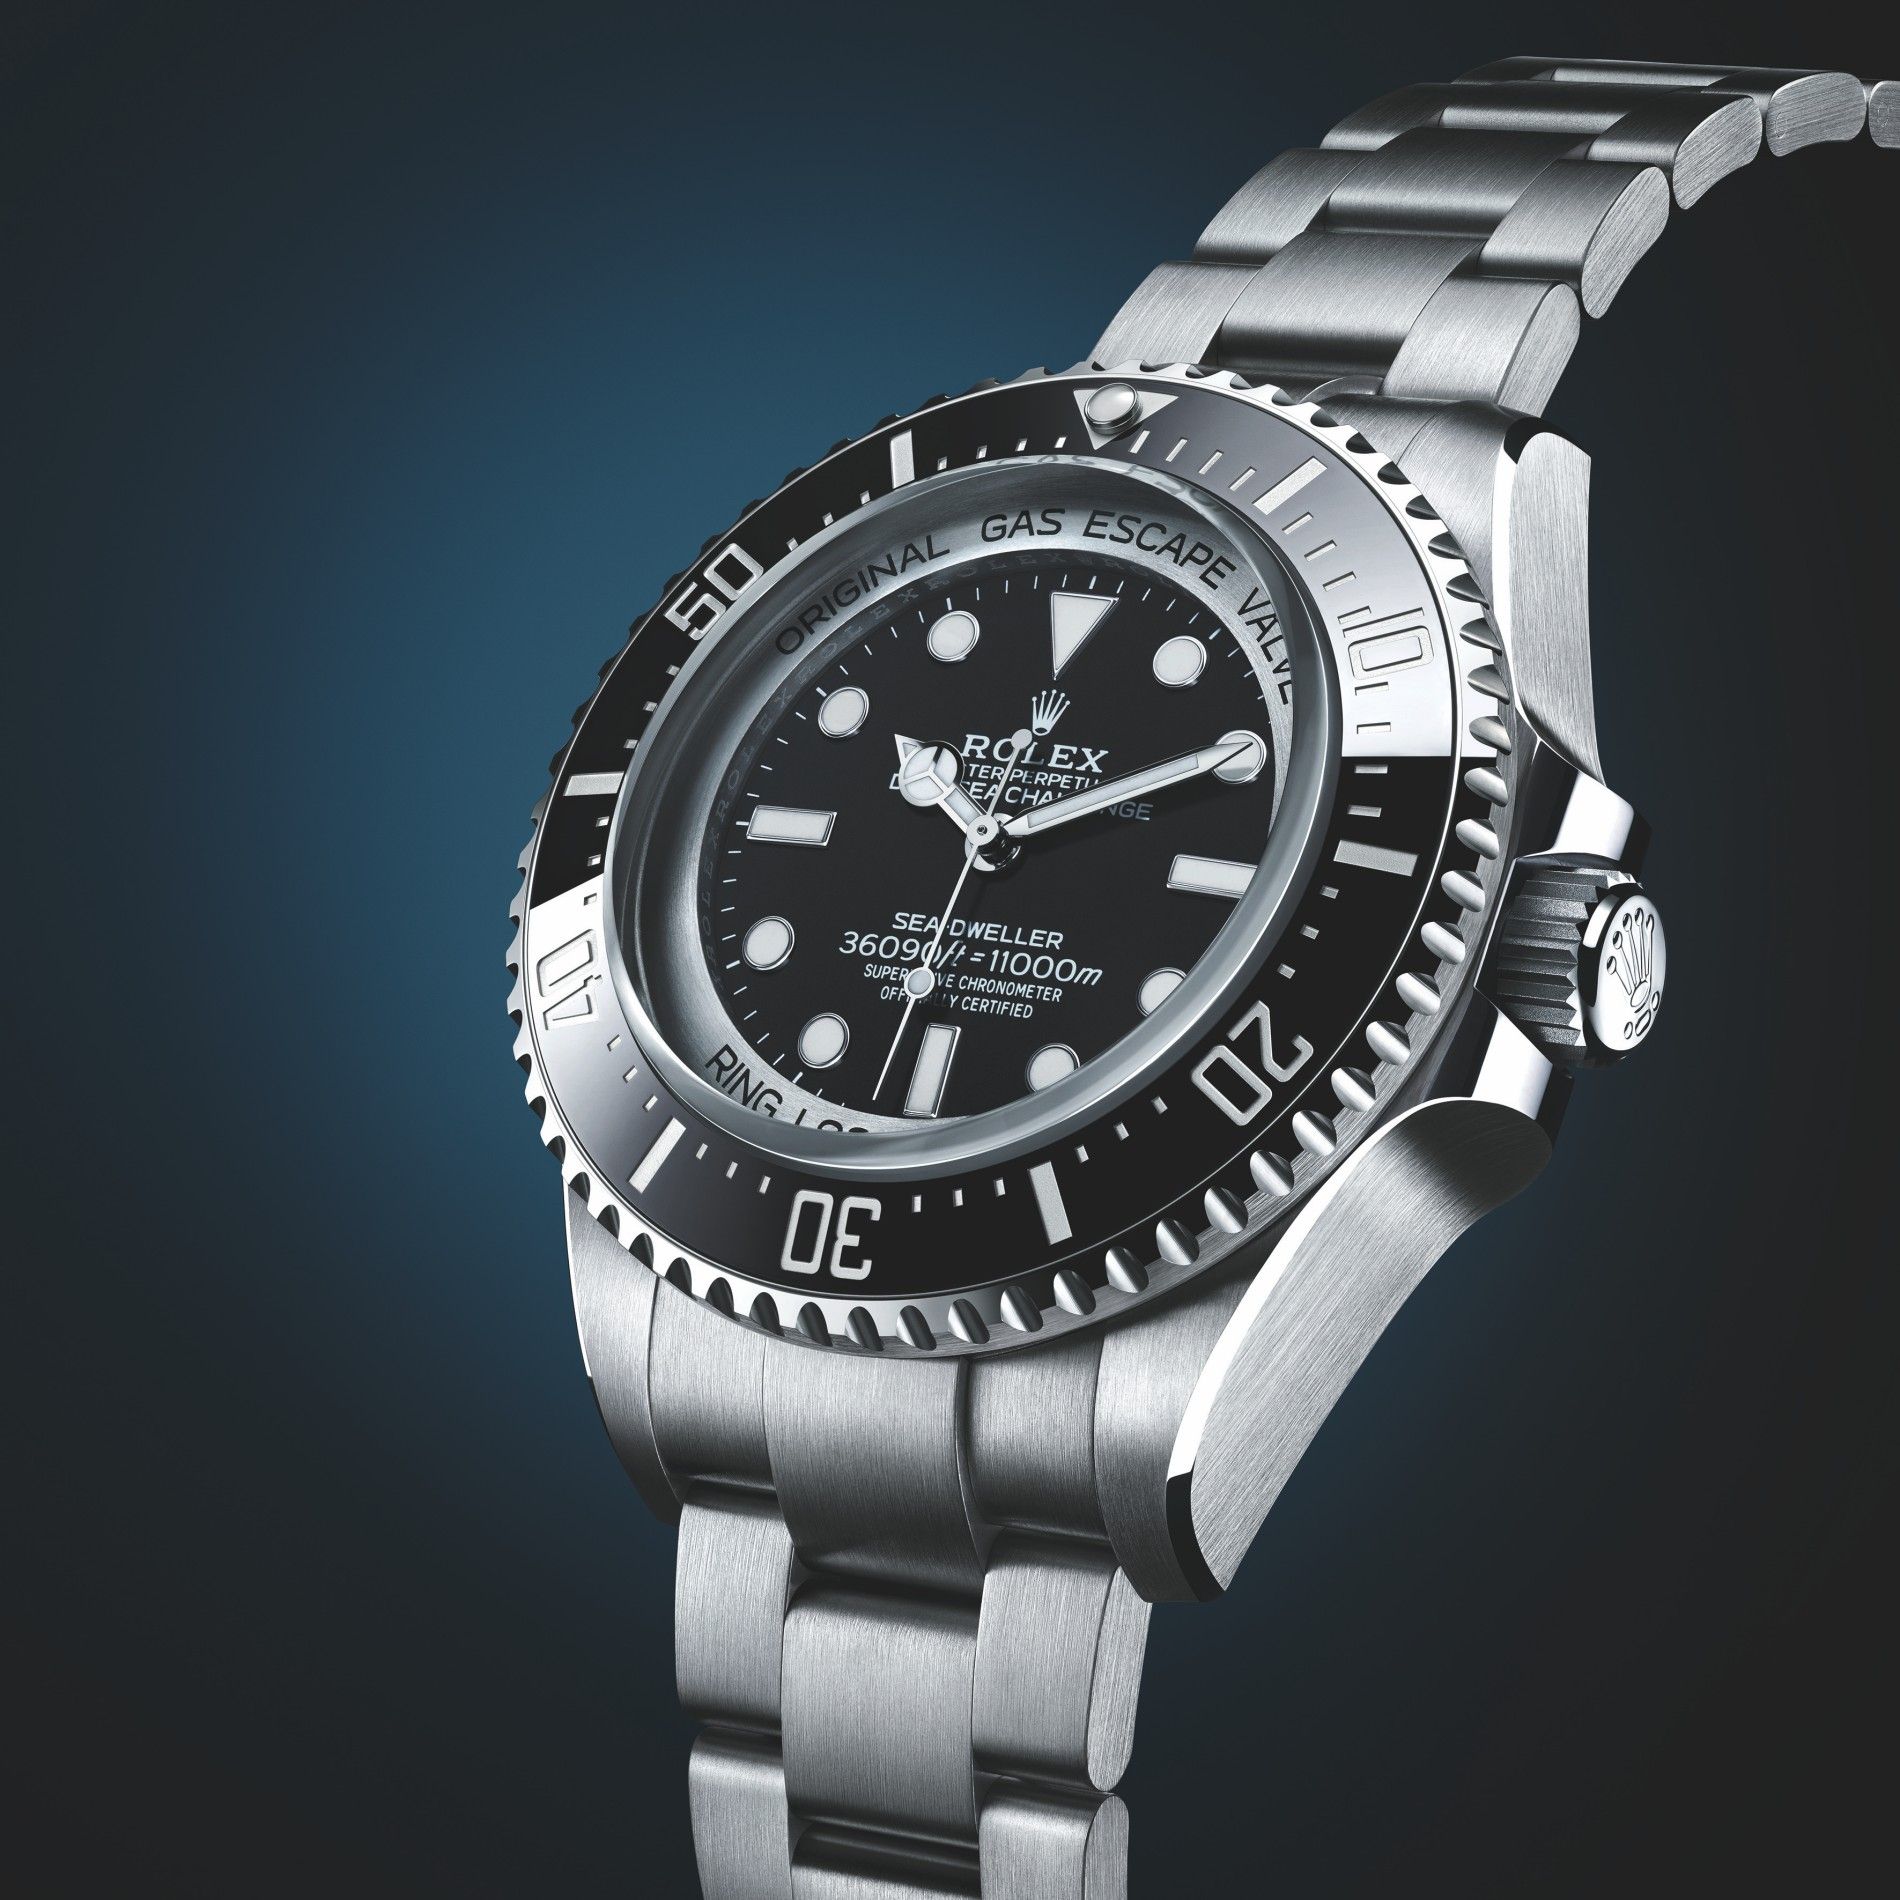 The new titanium Rolex Deepsea Challenge is the deepest dive watch yet